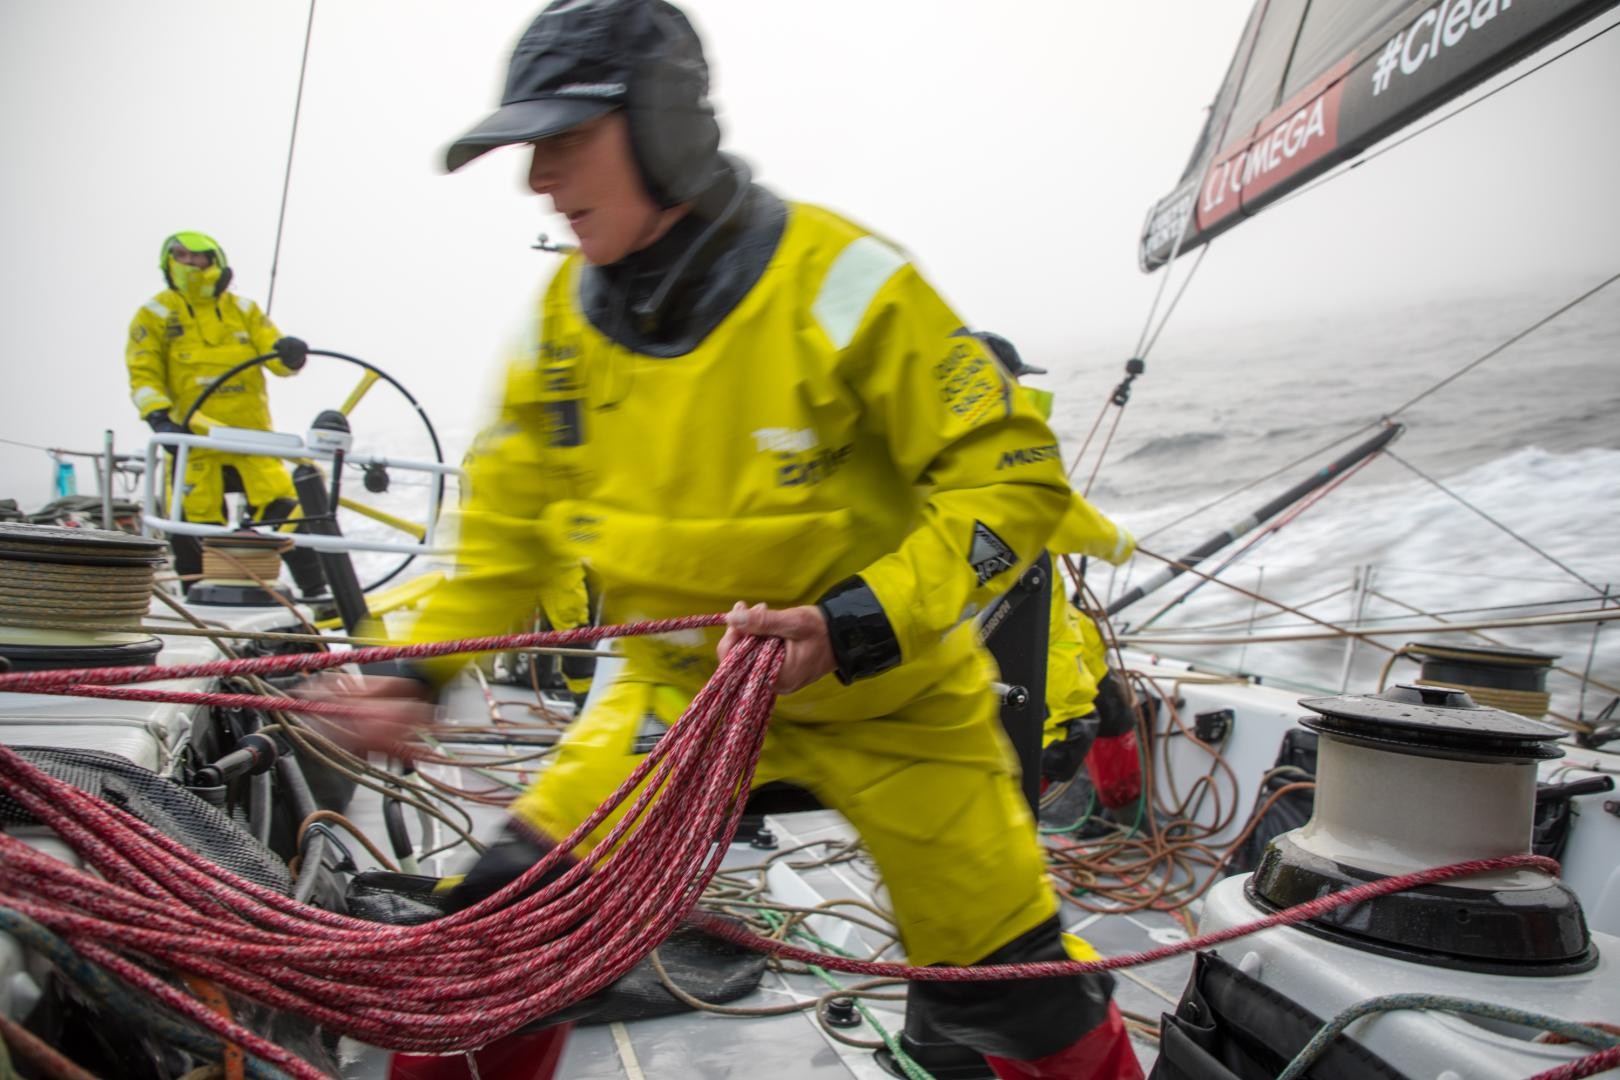 Leg 9, from Newport to Cardiff, day 1 on board Brunel. Abby Ehler in the fog.